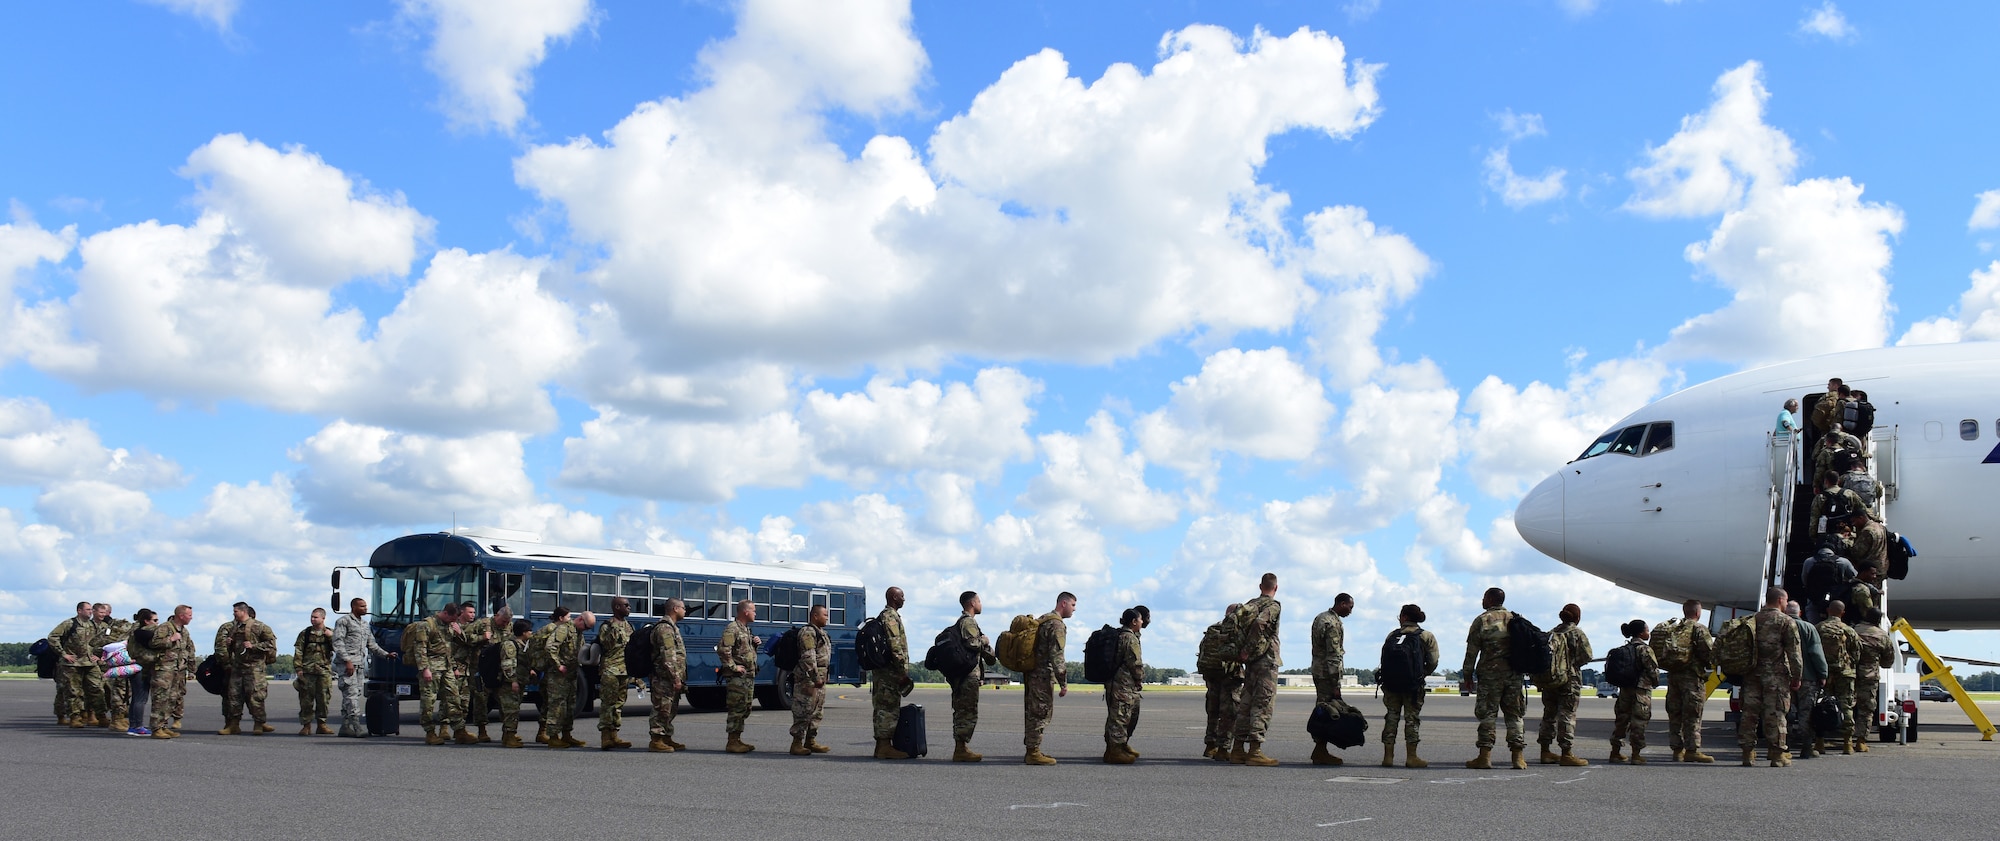 Deploying service members board an aircraft in preparation to deploy through Joint Base Charleston Oct. 15, 2018 in support of the Naval Station Norfolk air terminal while their airfield under goes scheduled maintenance.